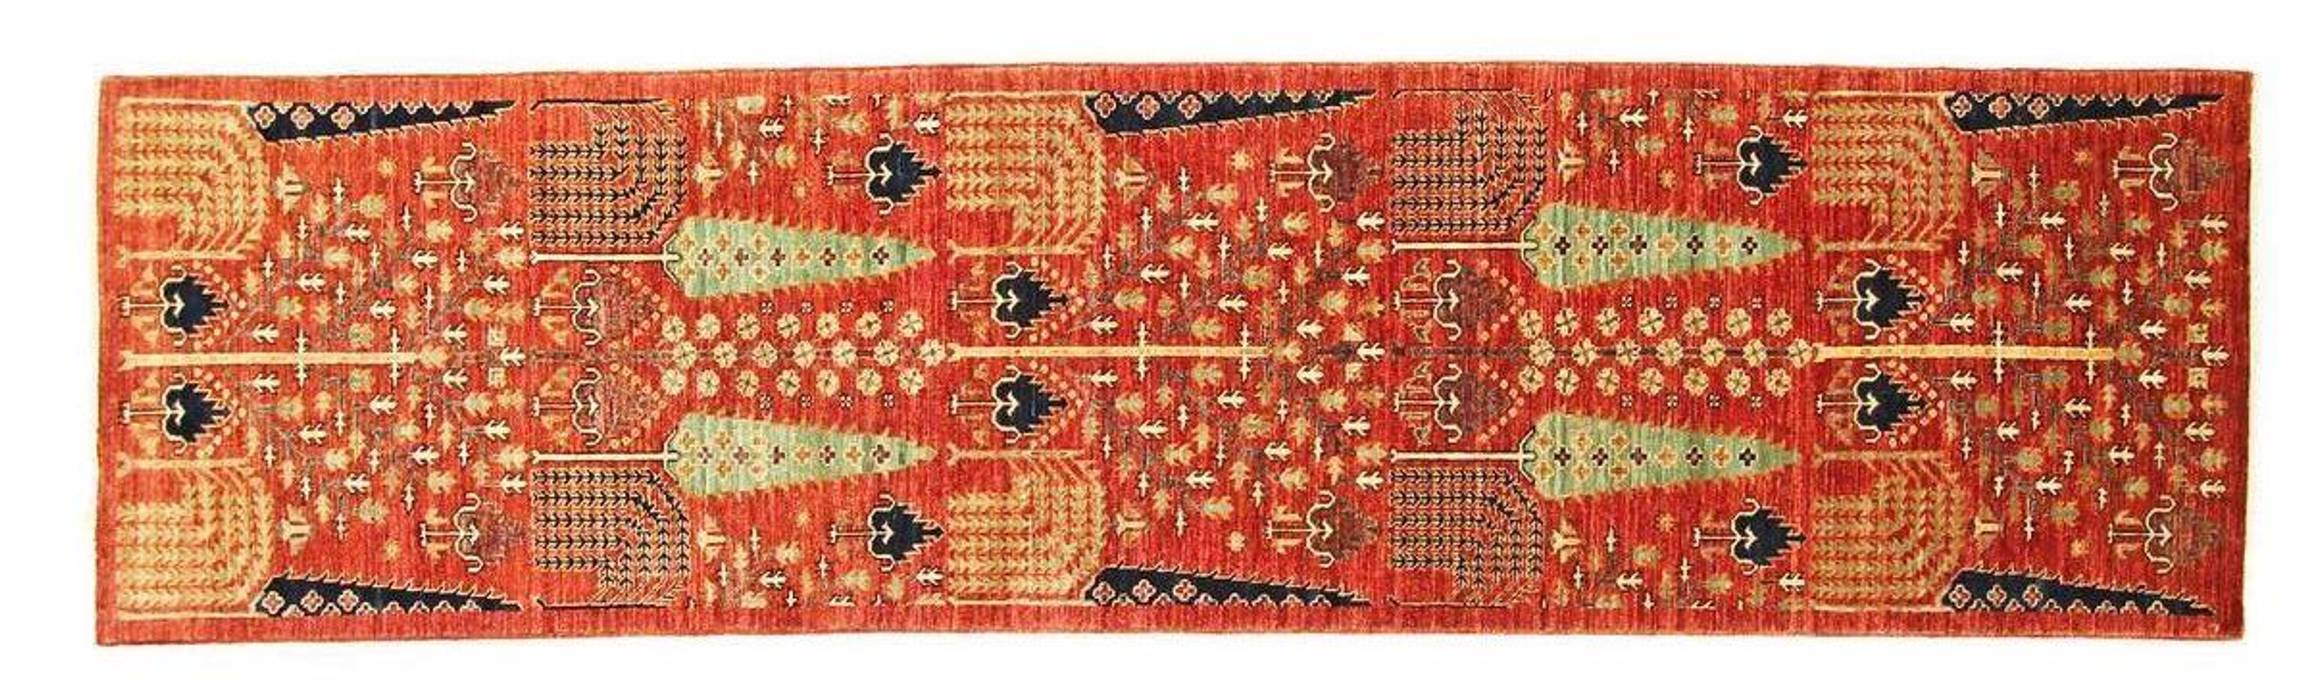 Arijana rug runner hand-knotted Nain Trading GmbH Floors Orient,Teppich,Carpet,rug,rugs,Oriental,Persian,Perser,Orientteppich,Perserteppich,Nain Trading,Carpets & rugs